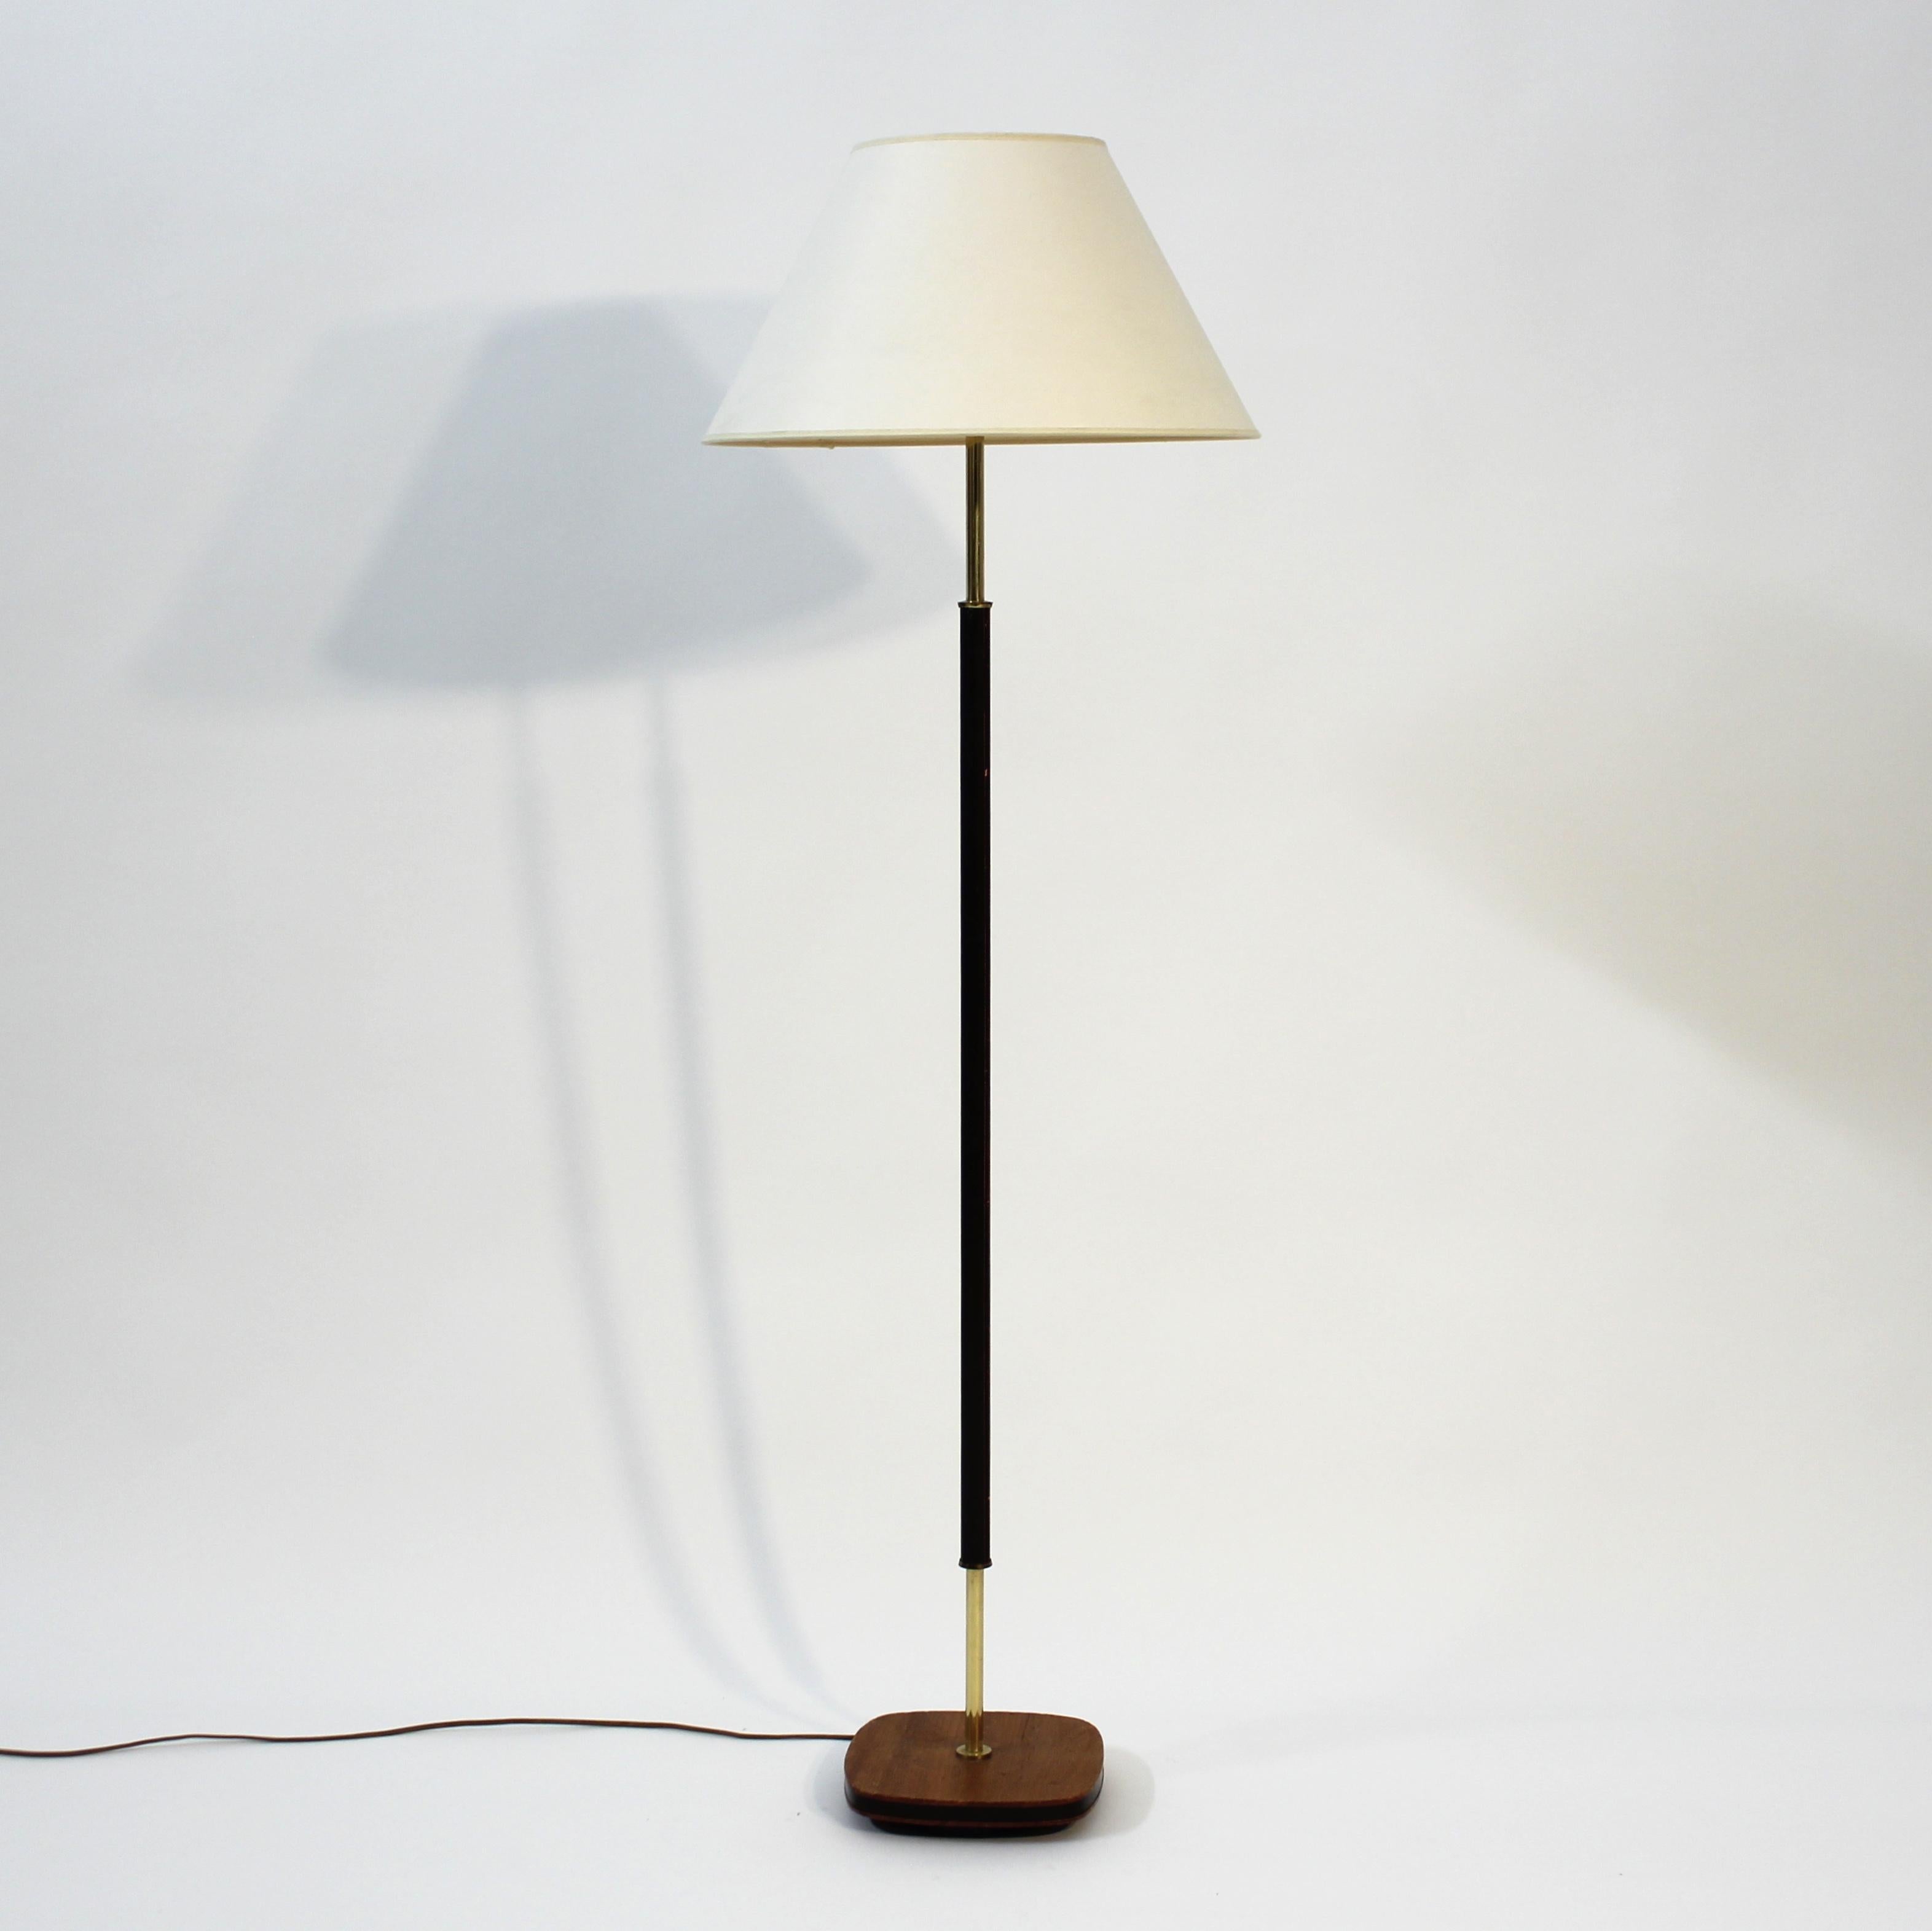 Swedish mid-century floor lamp with leather covered brass stem, mounted on a teak base. Beige/white shade. Good and honest vintage condition with light ware consistent with age and use.